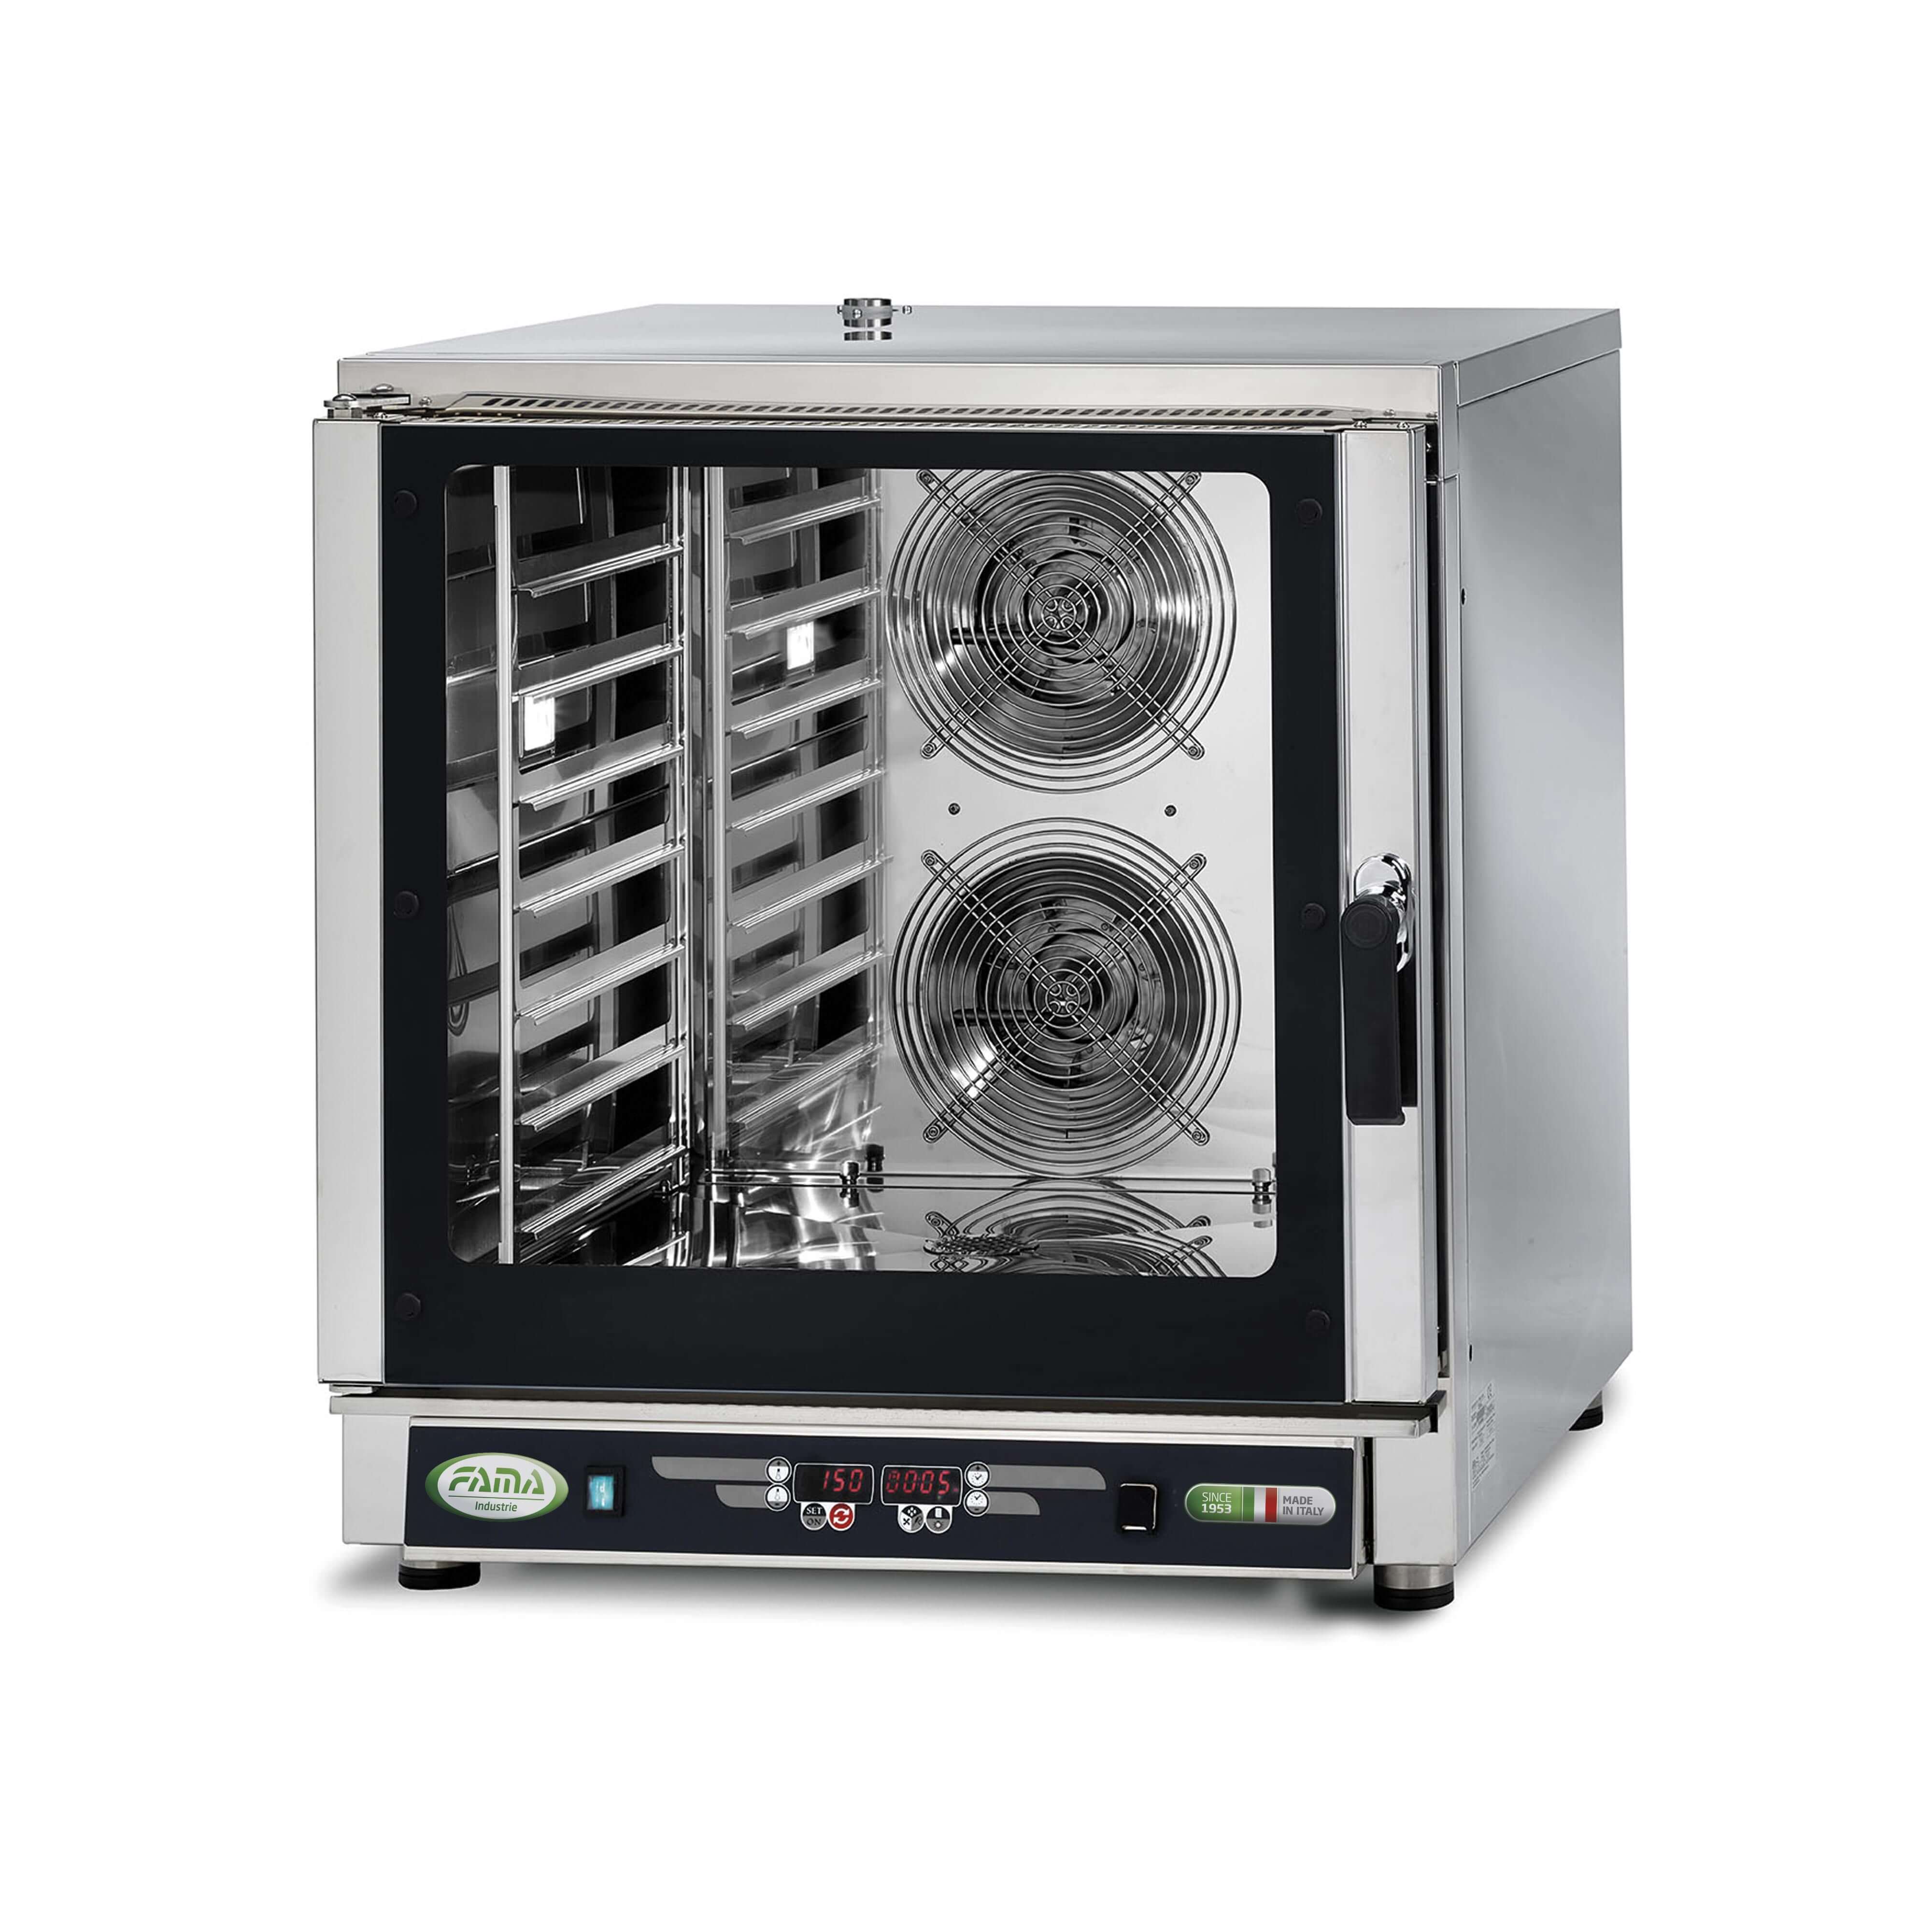 Digital Convection Ovens With Water Injection